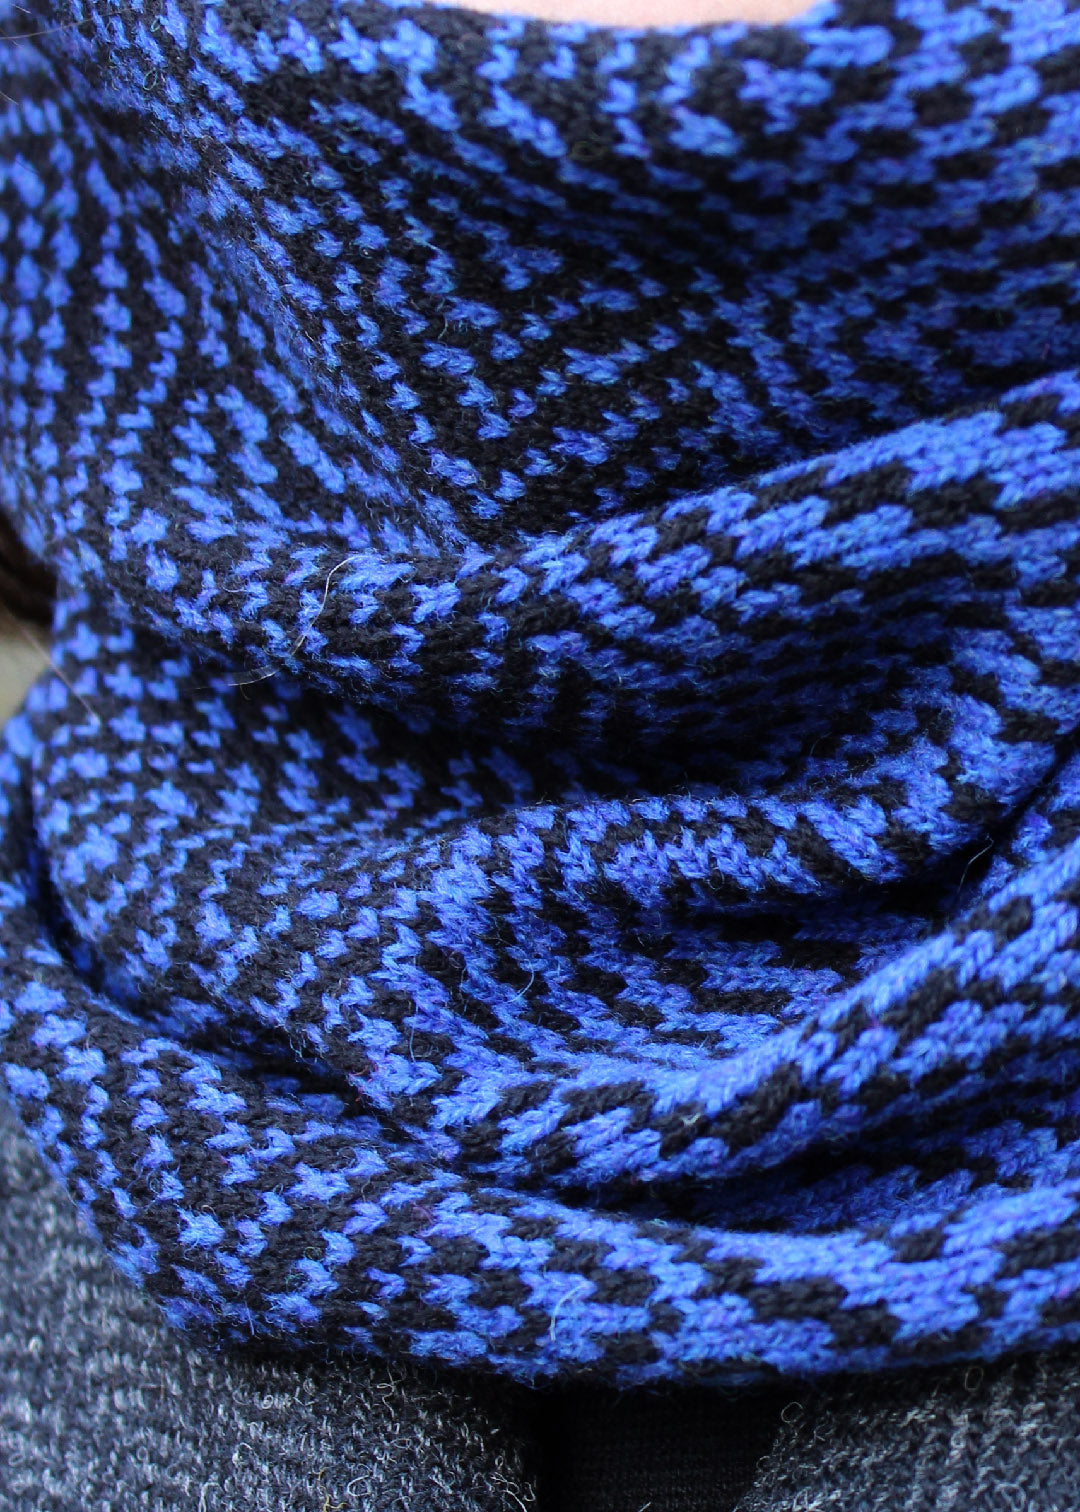 Merino lambswool neck warmer in Persian blue and black with a design inspired by map contours.